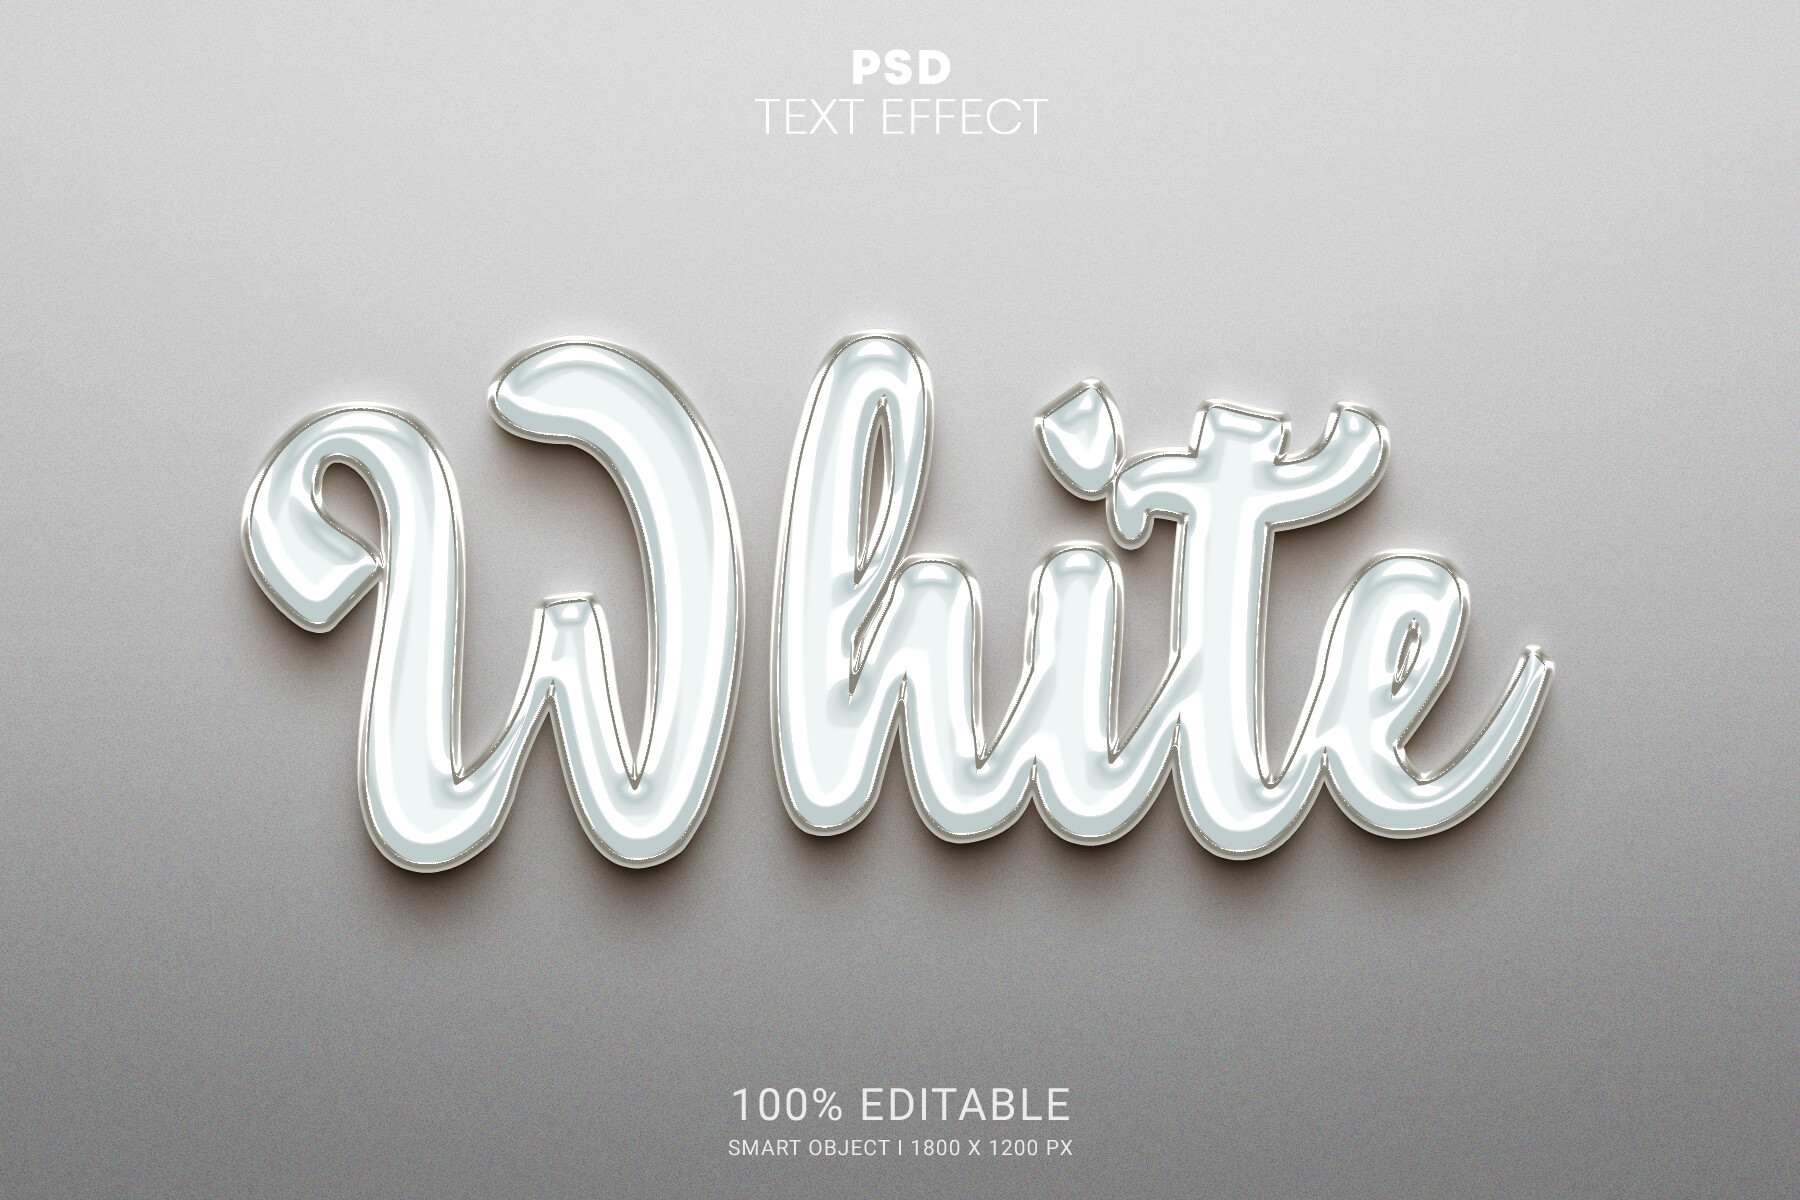 ArtStation - 3D White PSD fully editable text effect. Layer style PSD ...